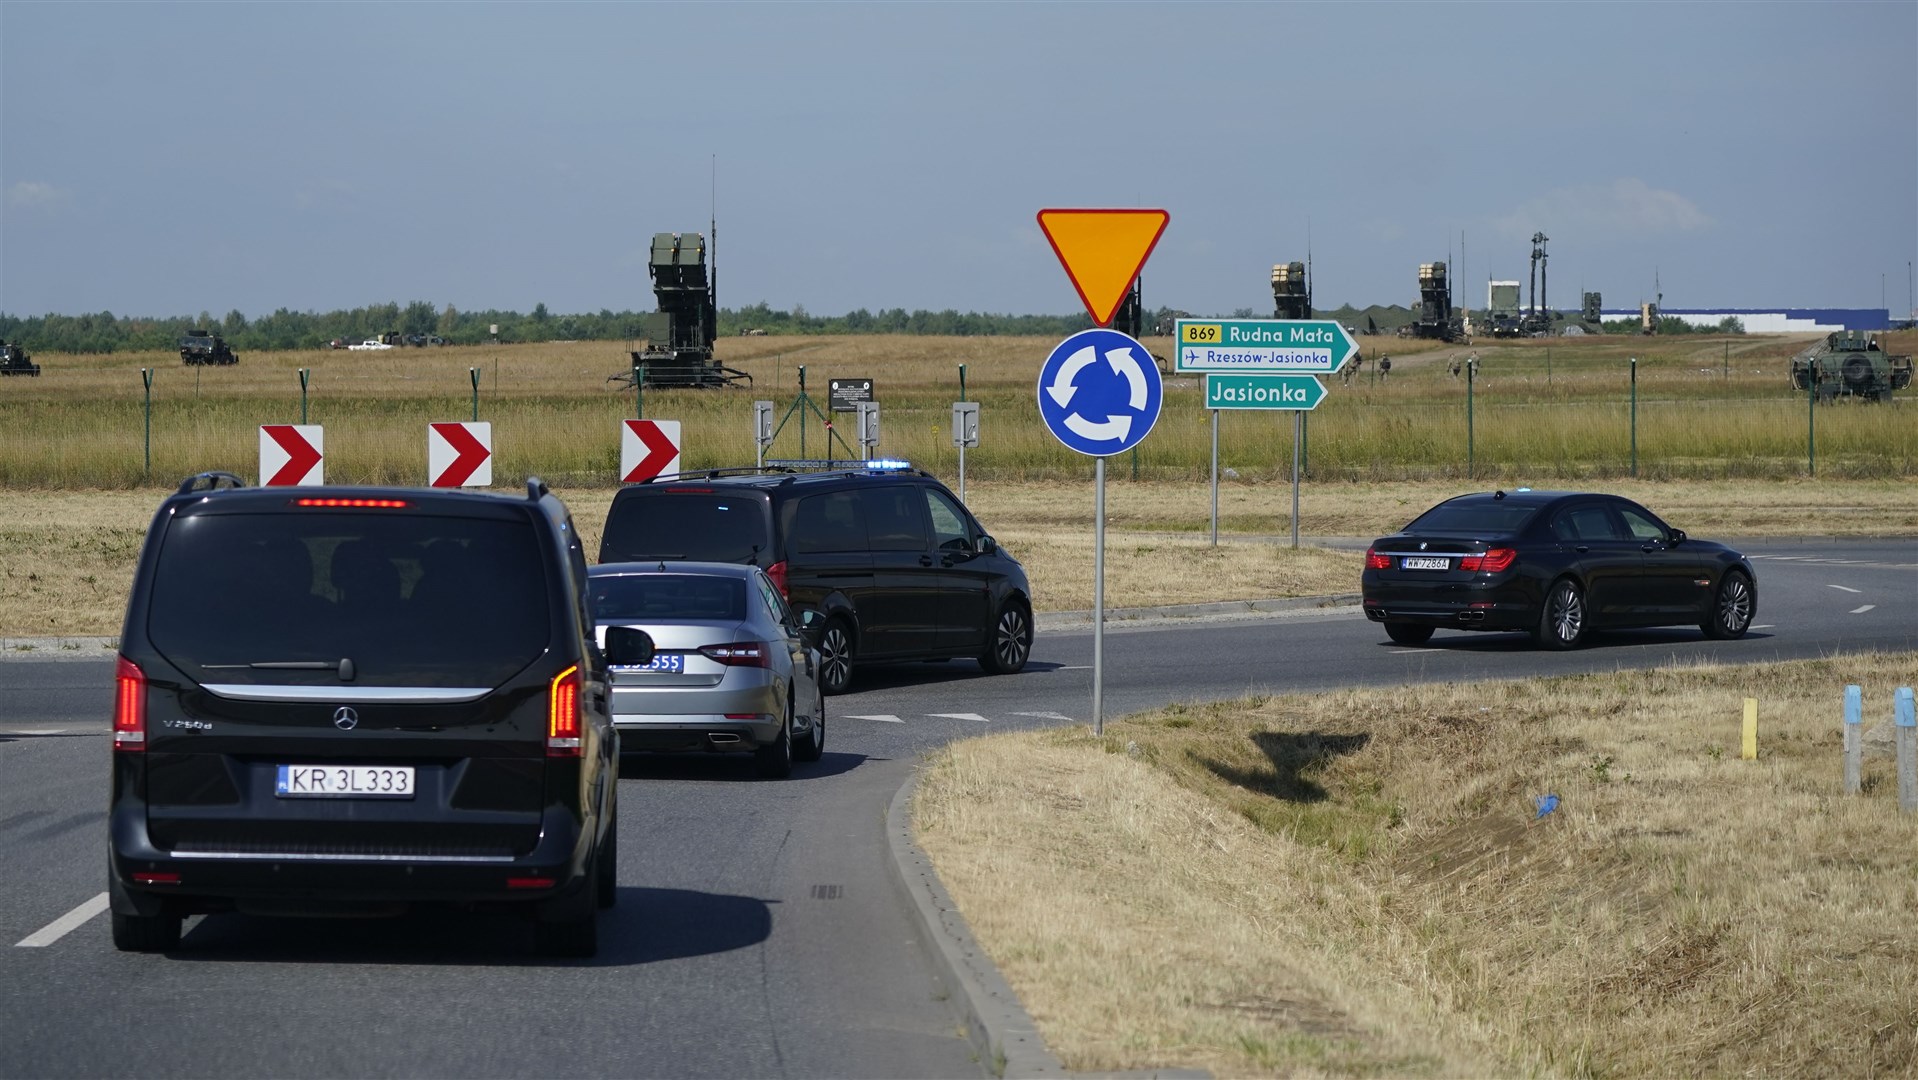 Vehicles from Taoiseach Micheal Martin’s cavalcade pass anti-aircraft defences at Rzeszow airport in Poland, after leaving Ukraine (Niall Carson/PA)